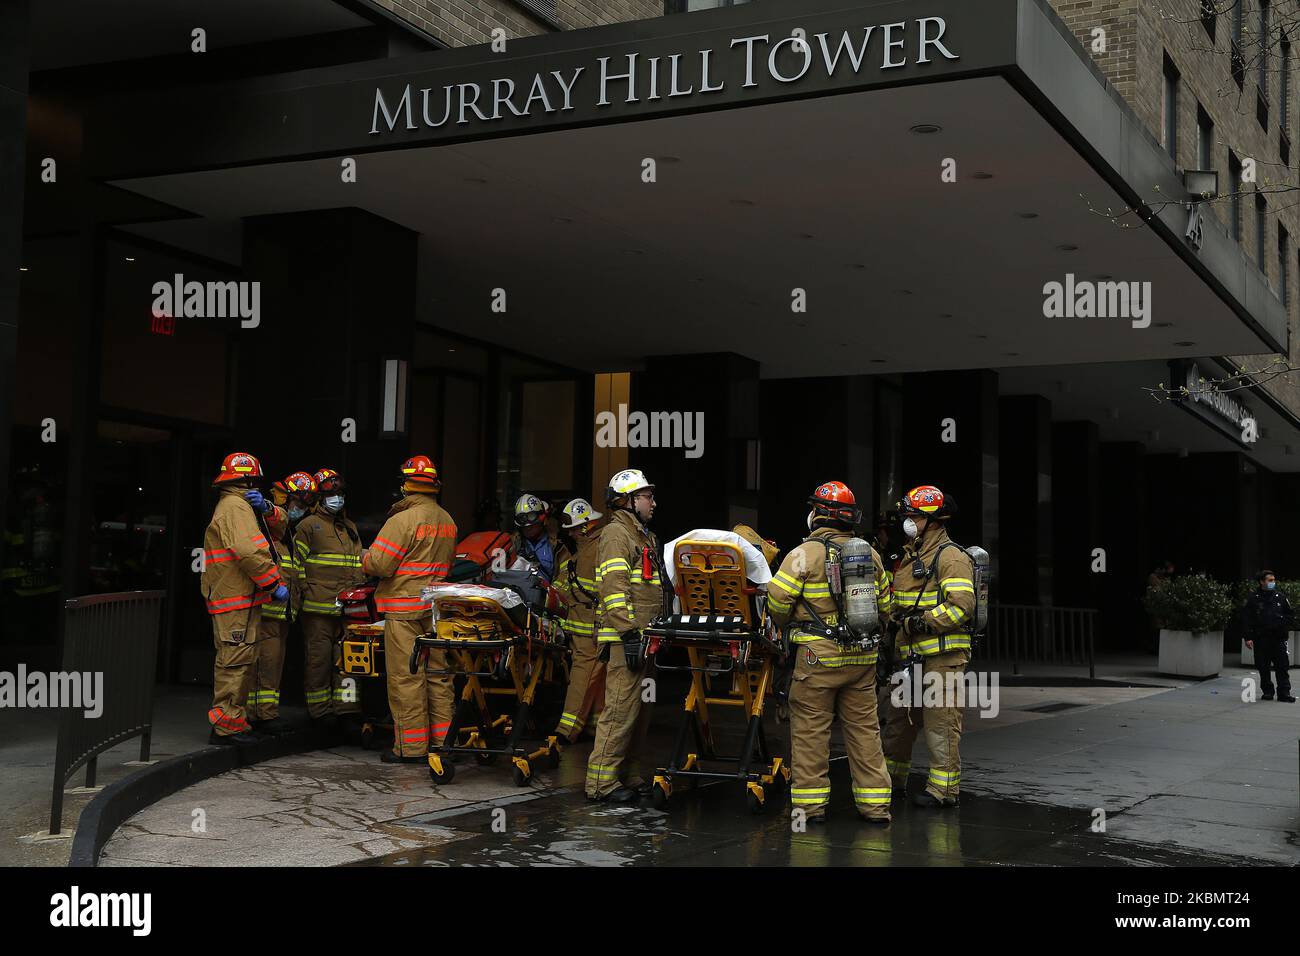 Emergency Services Rescue Personnel in New York, on April 23, 2020. New York Fire Department and Emergency services technicians were dispatched to a high-rise in New York City on April 23, 2020. Scores of firetrucks, ambulances and EMT rescue medics stood ready in front of Murray Hill towers on 2nd Avenue. (Photo by John Lamparski/NurPhoto) Stock Photo